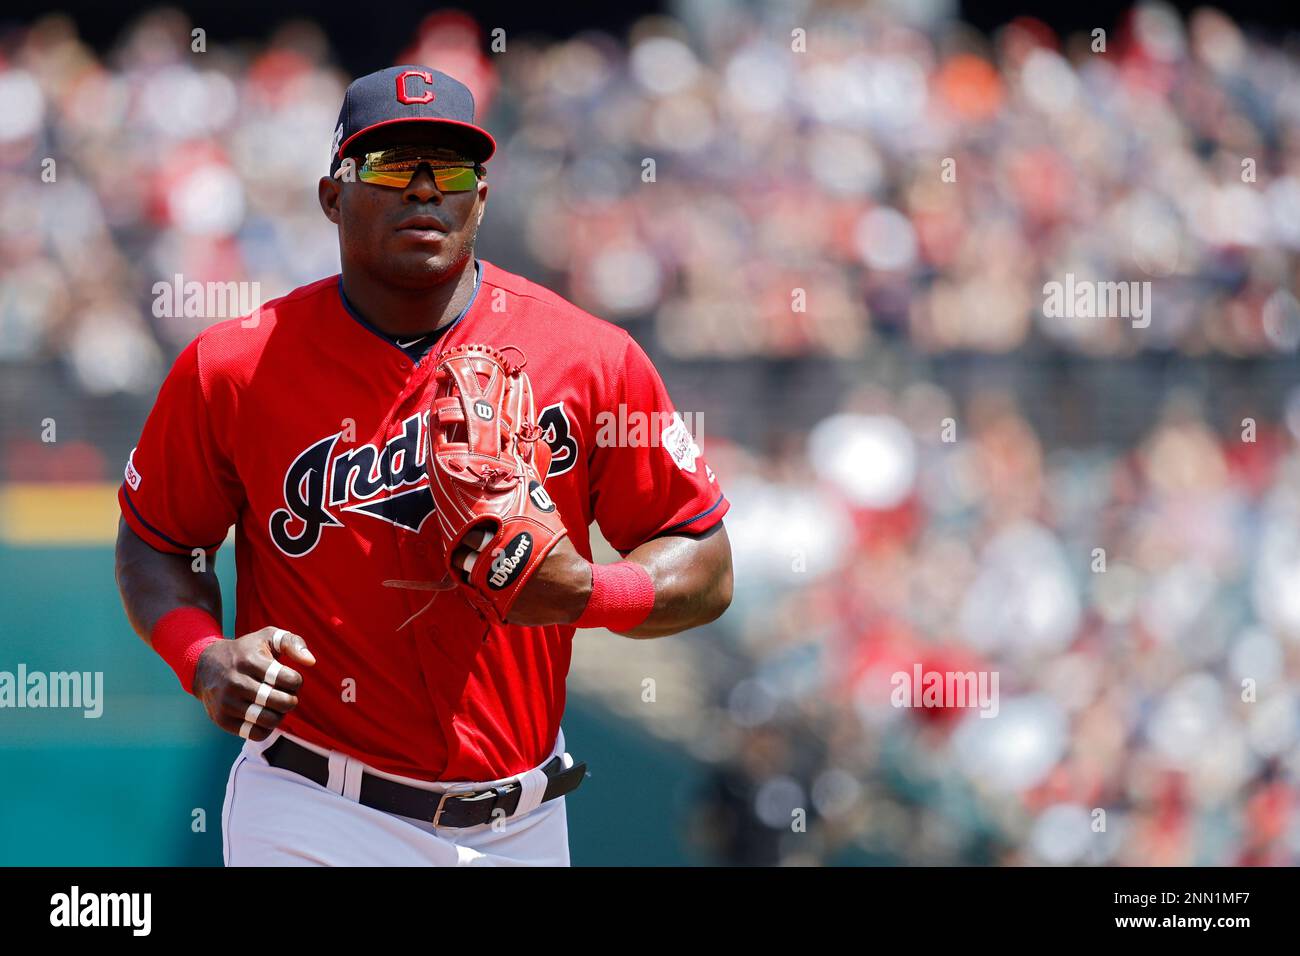 CLEVELAND, OH - AUGUST 04: Yasiel Puig #66 of the Cleveland Indians looks  on during a game against the Los Angeles Angels at Progressive Field on  August 4, 2019 in Cleveland, Ohio.